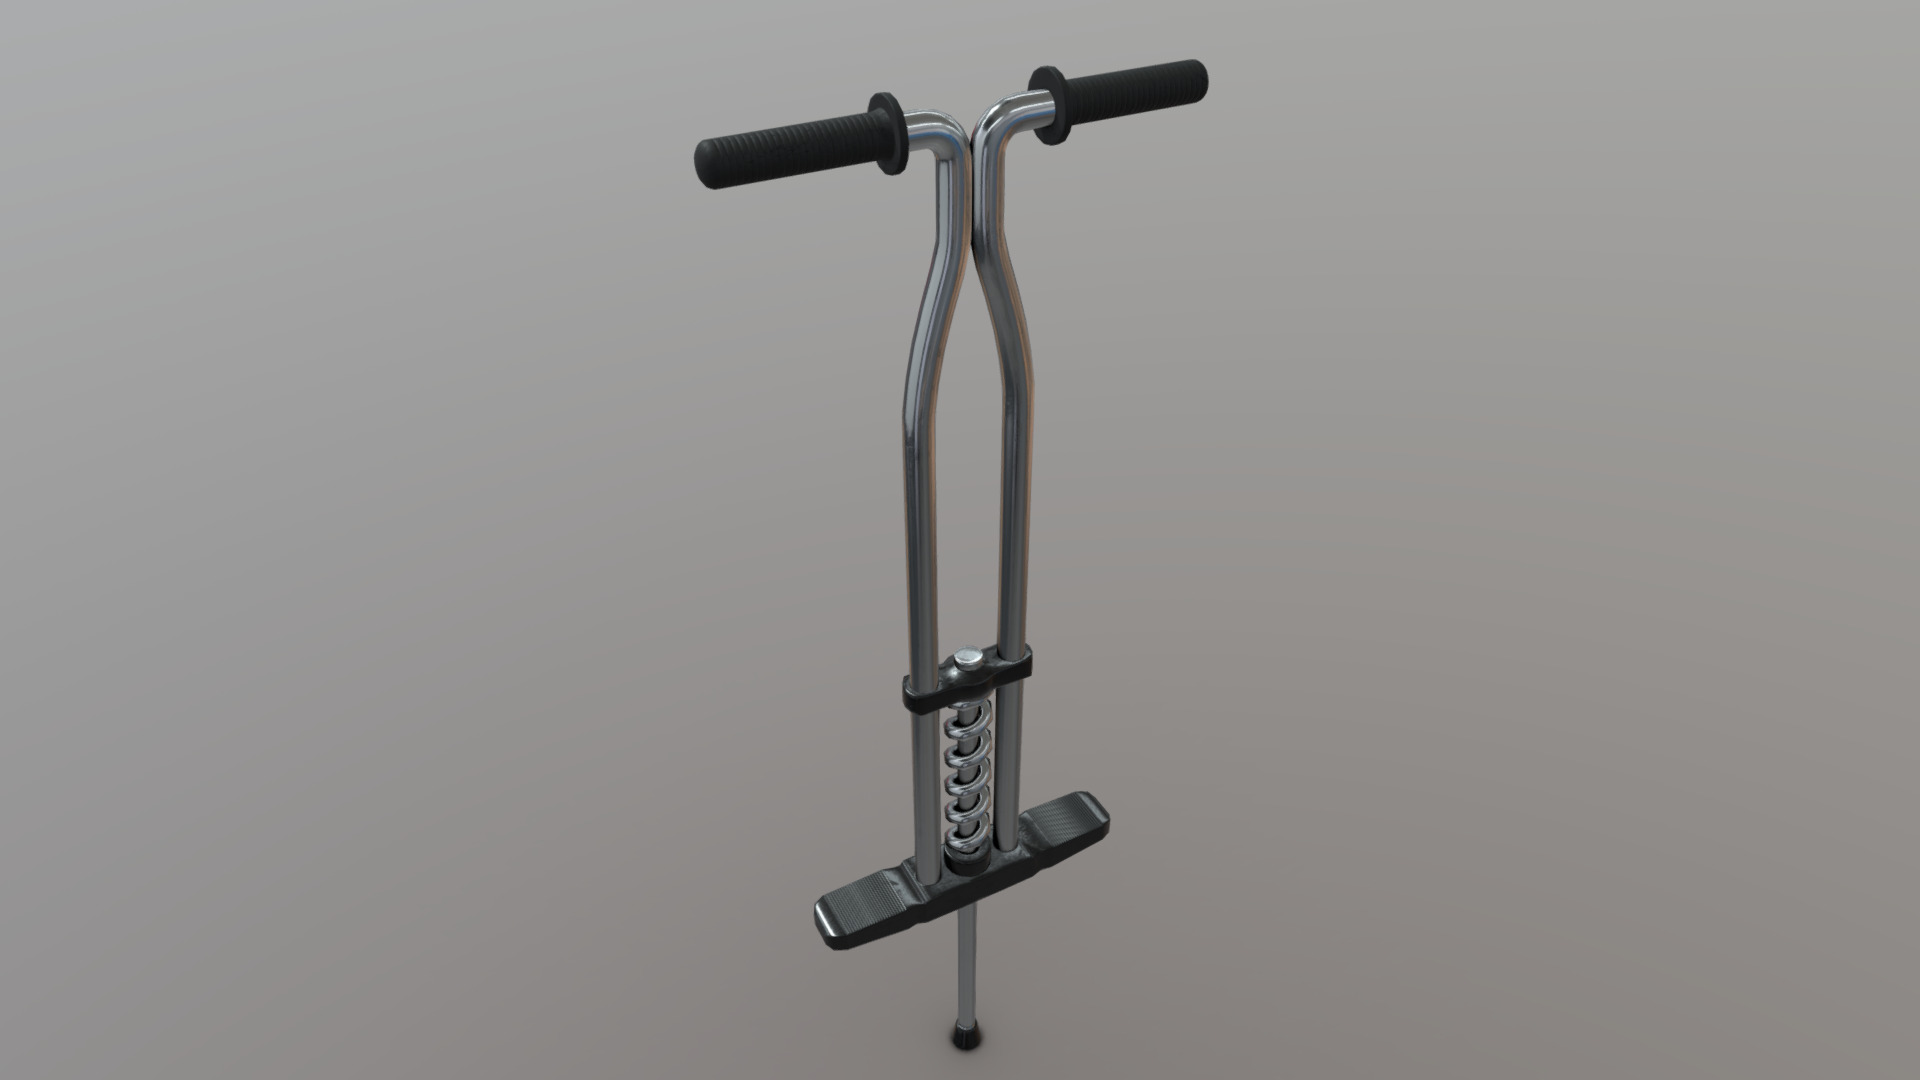 3D model Pogo Stick - This is a 3D model of the Pogo Stick. The 3D model is about a silver and black bicycle.